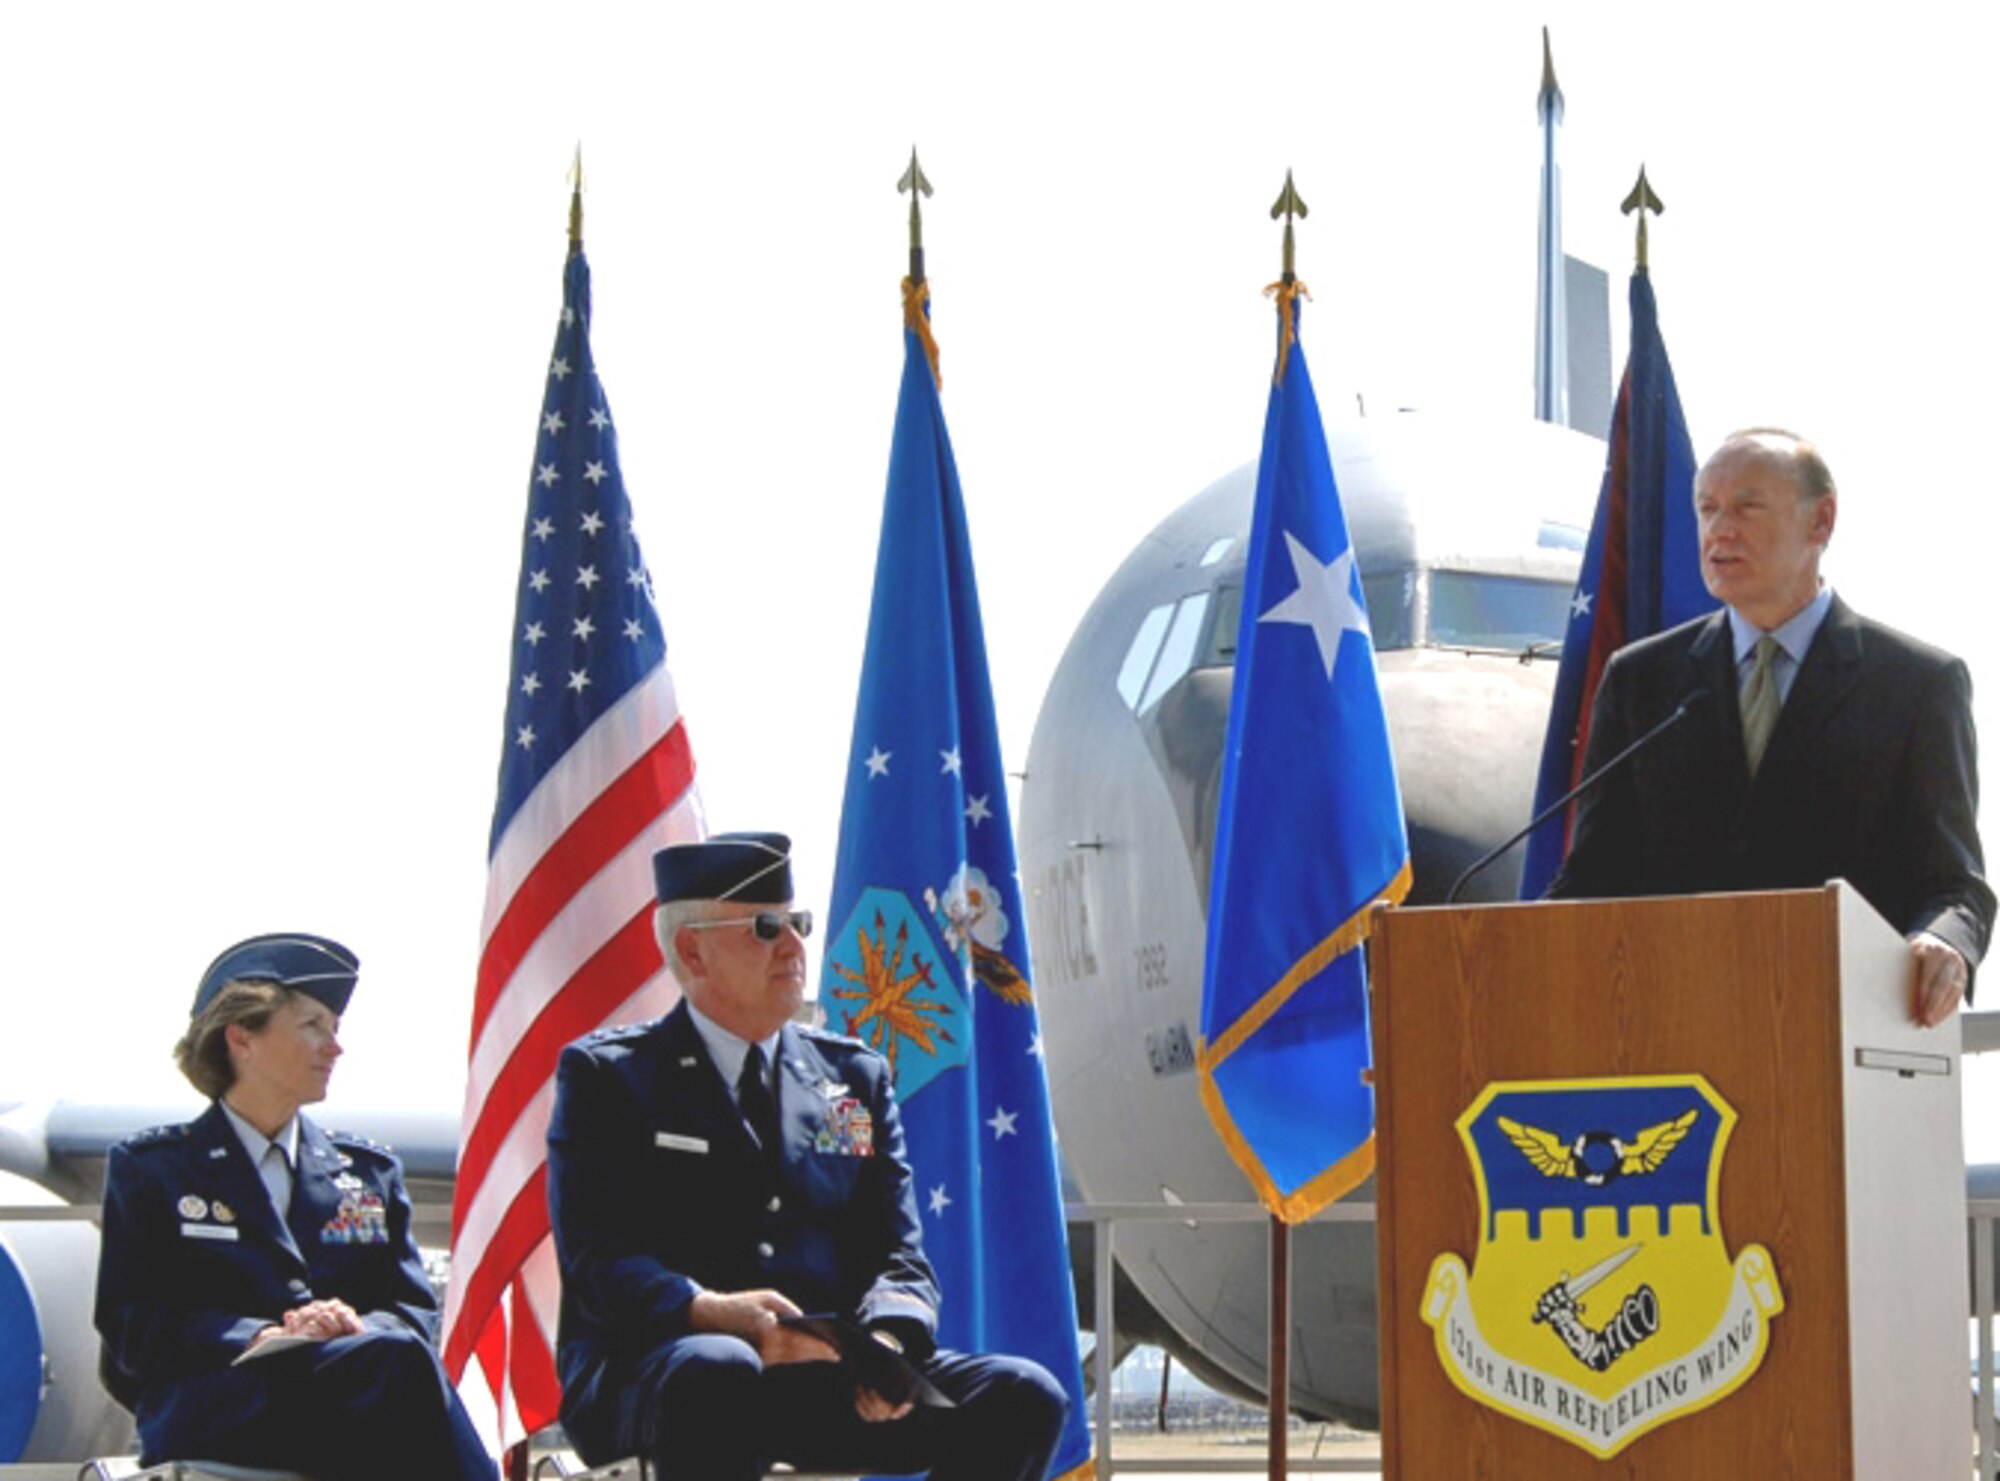 Ohio Lt. Gov. Lee Fisher expresses his admiration for men and women in uniform during a ceremony Monday at Rickenbacker International Airport, Columbus, Ohio, during which he issued a state proclamation designating Sept. 24-30 as Air Force Heritage Week. Seated far left, Lt. Gen. Terry Gabreski, vice commander of Air Force Materiel Command, spoke during the ceremony about the relevance of Air Force heritage to today’s Airmen in serving their fellow citizens. To her left is Maj. Gen Harry "A.J." W. Feucht, Jr. , assistant adjutant general for Air serving as commander, Ohio Air National Guard. Air Force Heritage Week is held in conjunction with the Gathering of Mustangs and Legends this weekend at Rickenbacker International Airport in recognition of the Air Force's 60th anniversary. (Air Force Photo by SSgt Douglas Nicodemus)